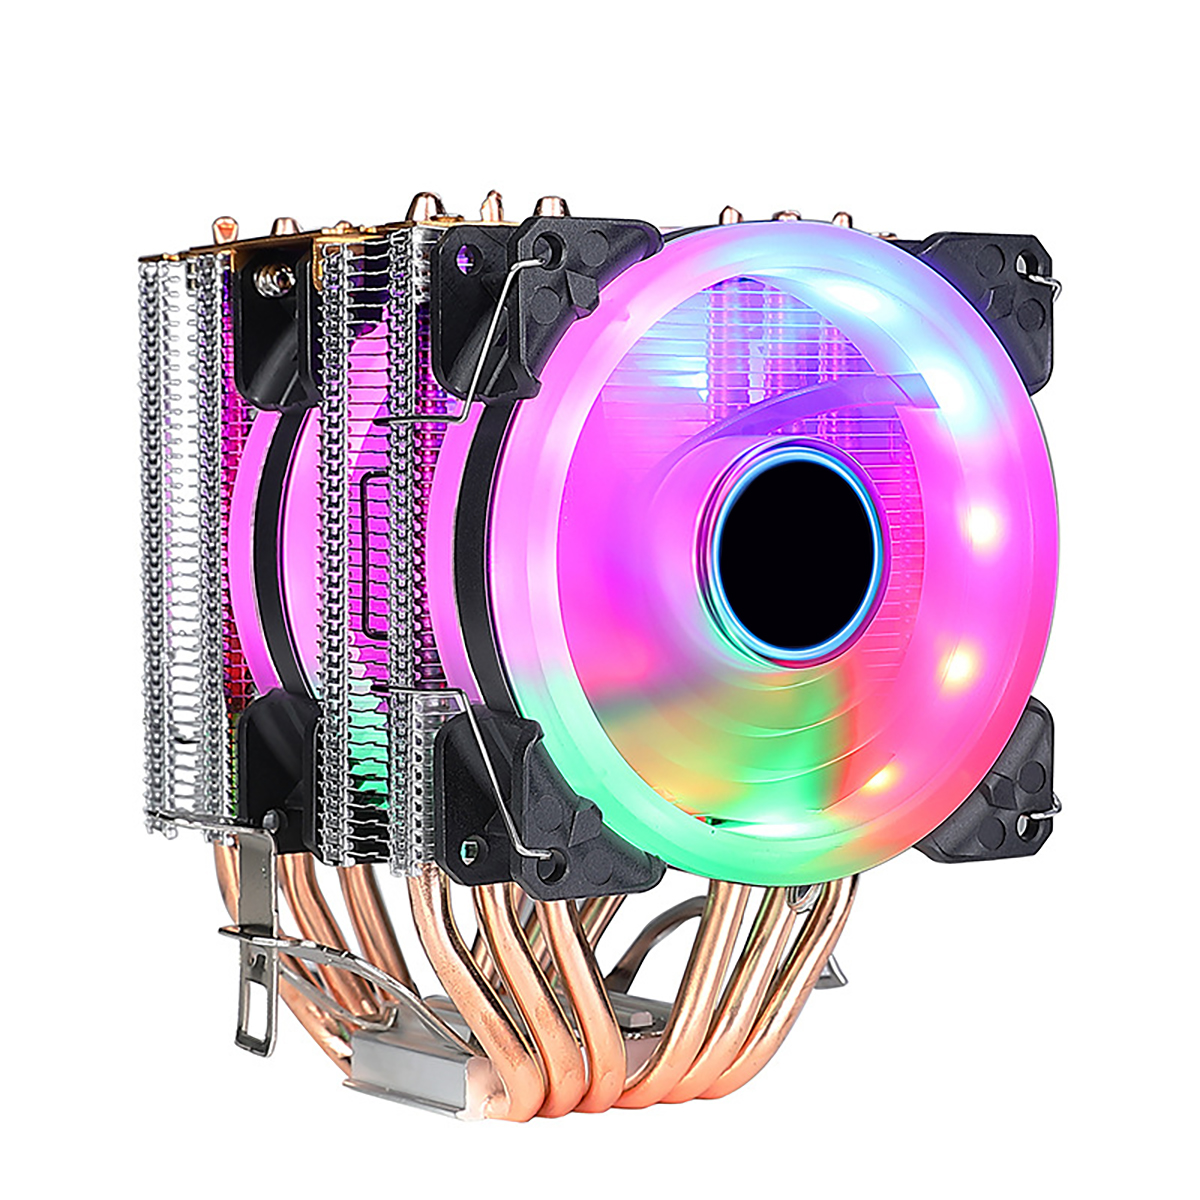 Find EVESKY CPU Cooling Fan 1/2/3 Fans 3/4 Pin 6 Heat Pipes RGB/Without Light Silent Computer Case Cooler CPU Heatsink for Intel AMD CPU for Sale on Gipsybee.com with cryptocurrencies